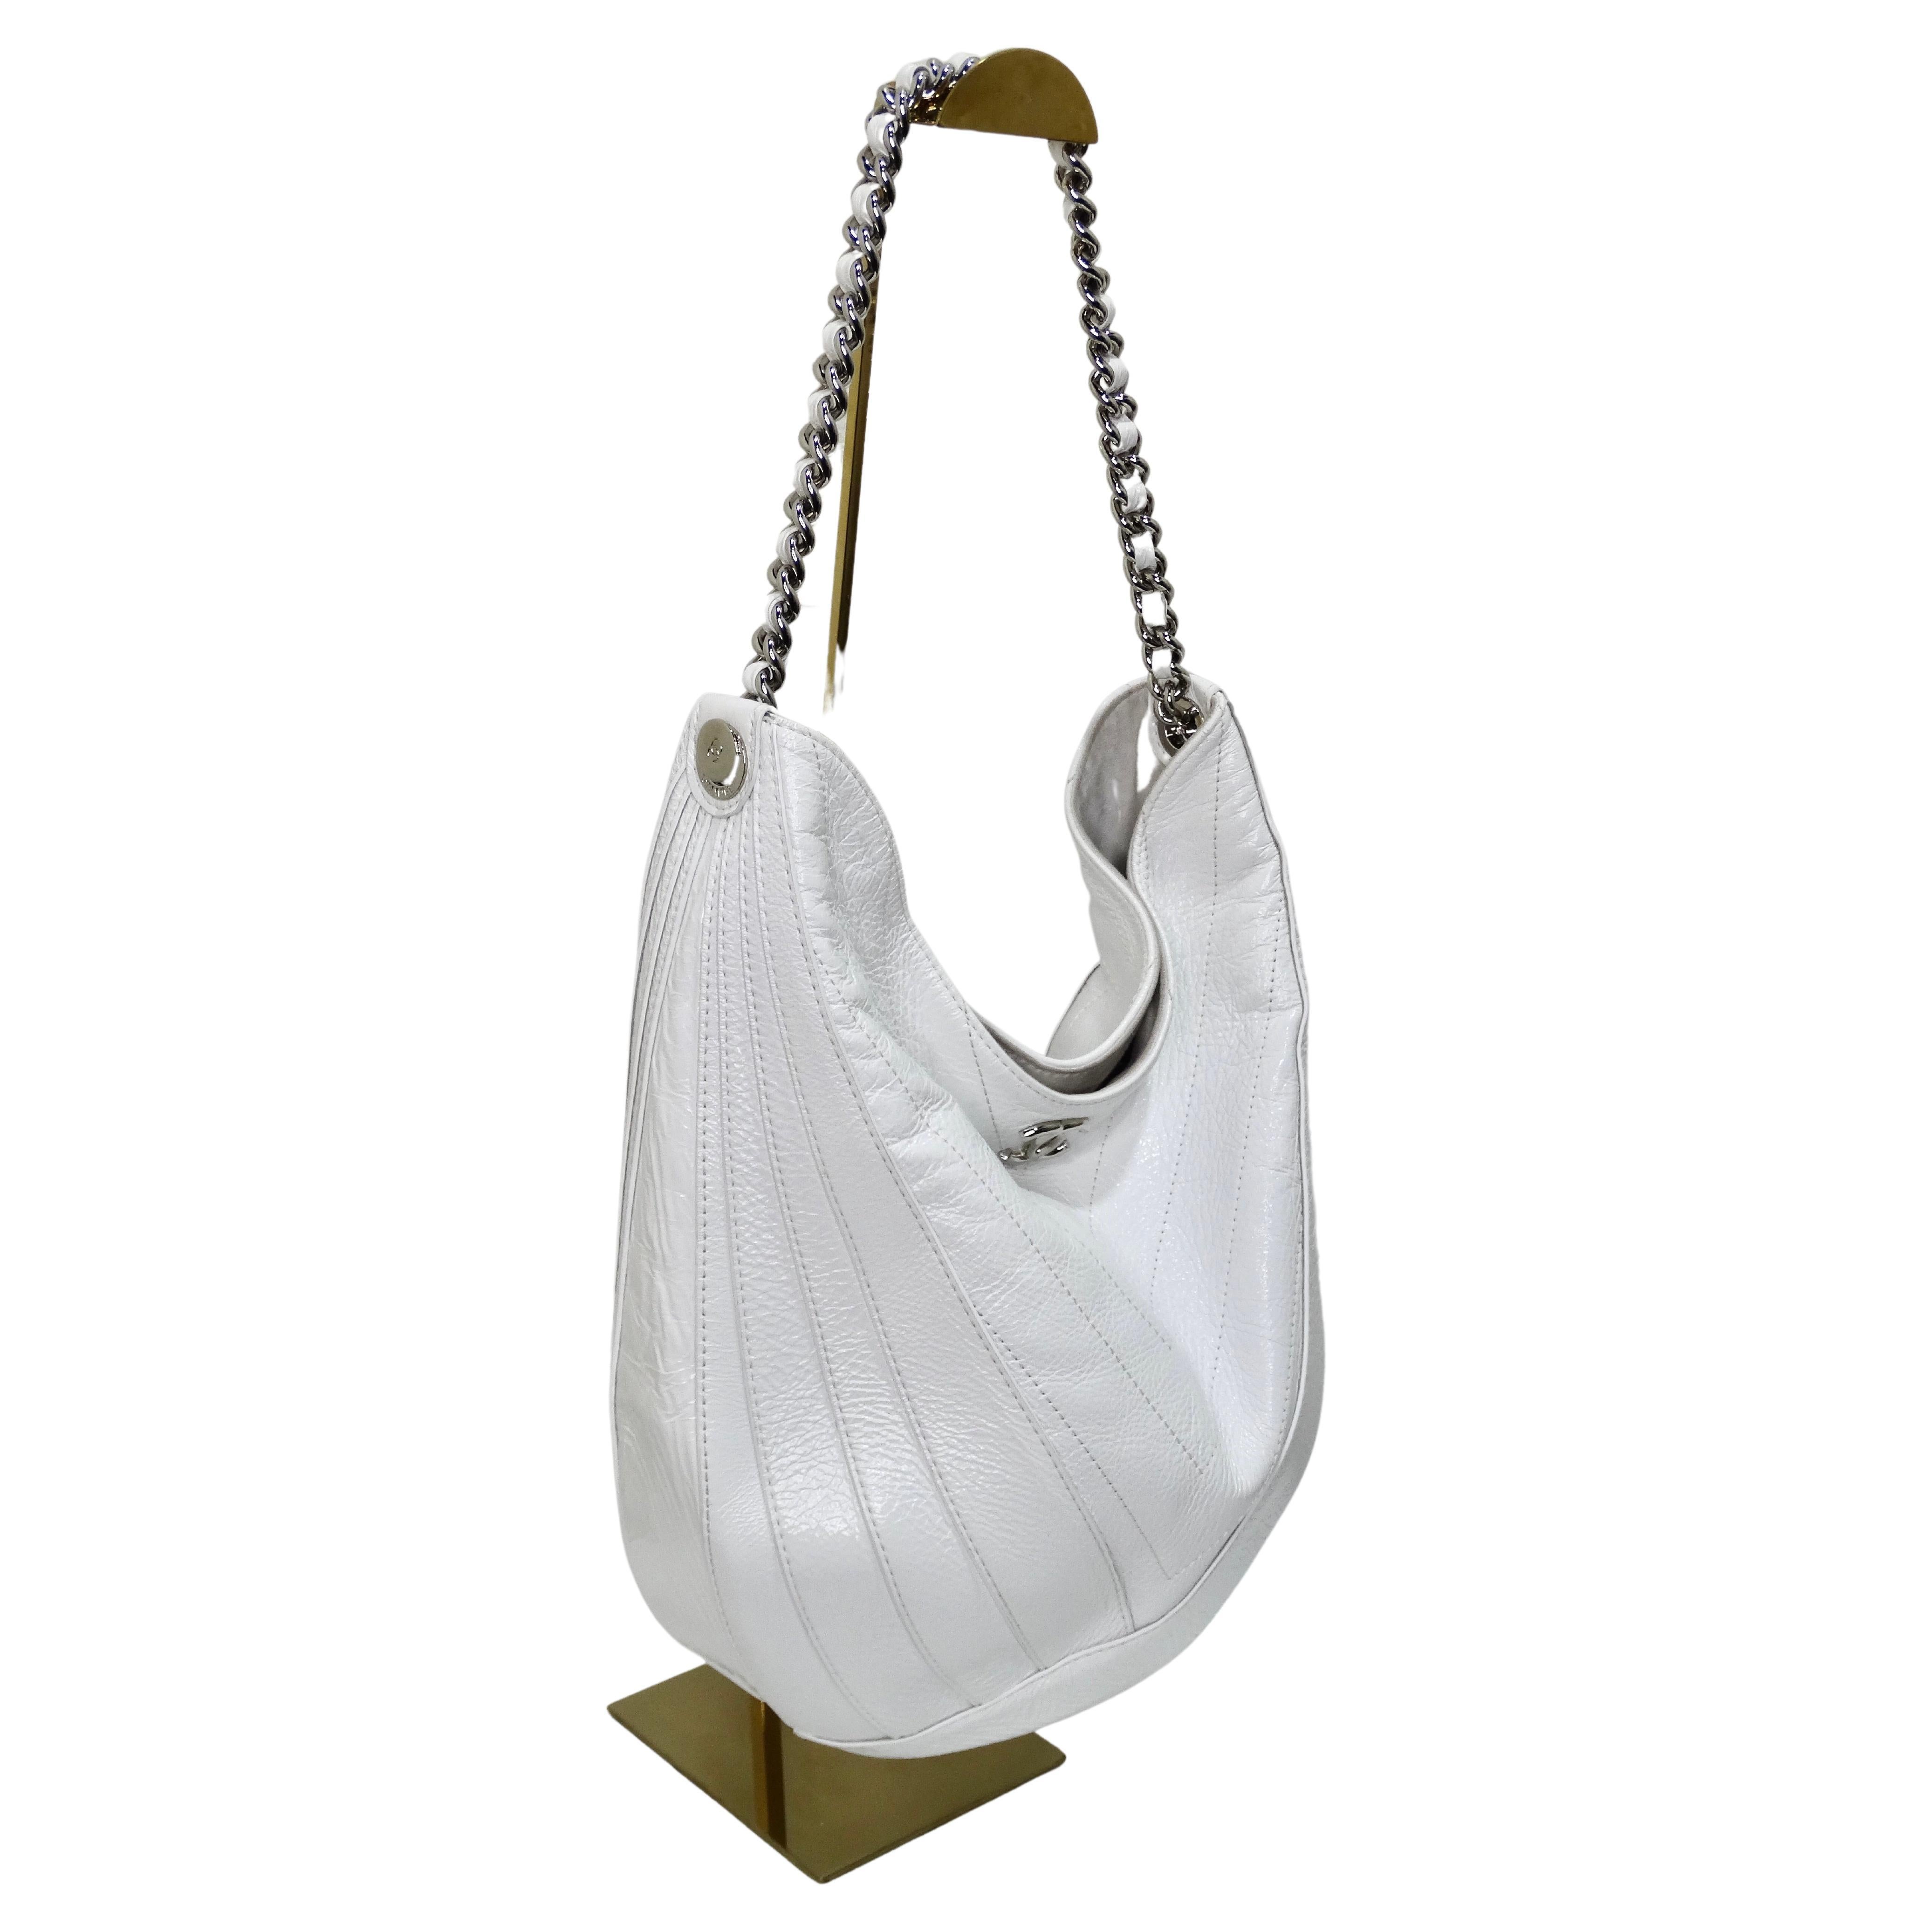 NOW TRENDING: Large slouchy bags! Get your hands on the biggest trend for the fall and winter. This soft teardrop shape drapes perfectly to give you that casual but put-together look. The leather is a crumpled patent that wears beautifully and will